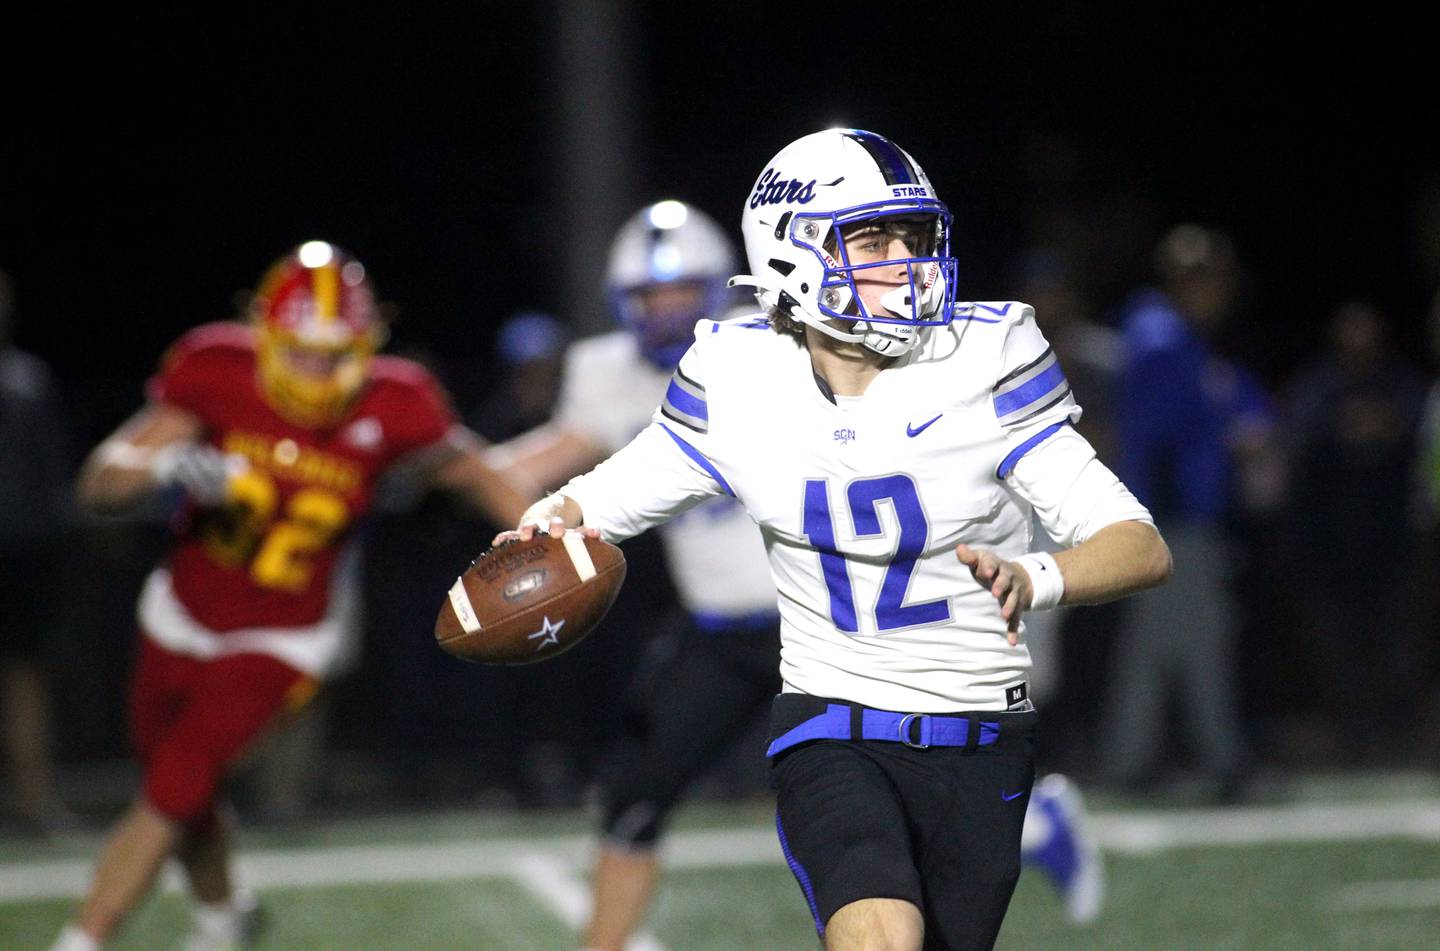 St. Charles North quarterback Will Vaske looks to throw the ball in the third quarter during a game at Batavia on Friday, Oct. 21, 2022.